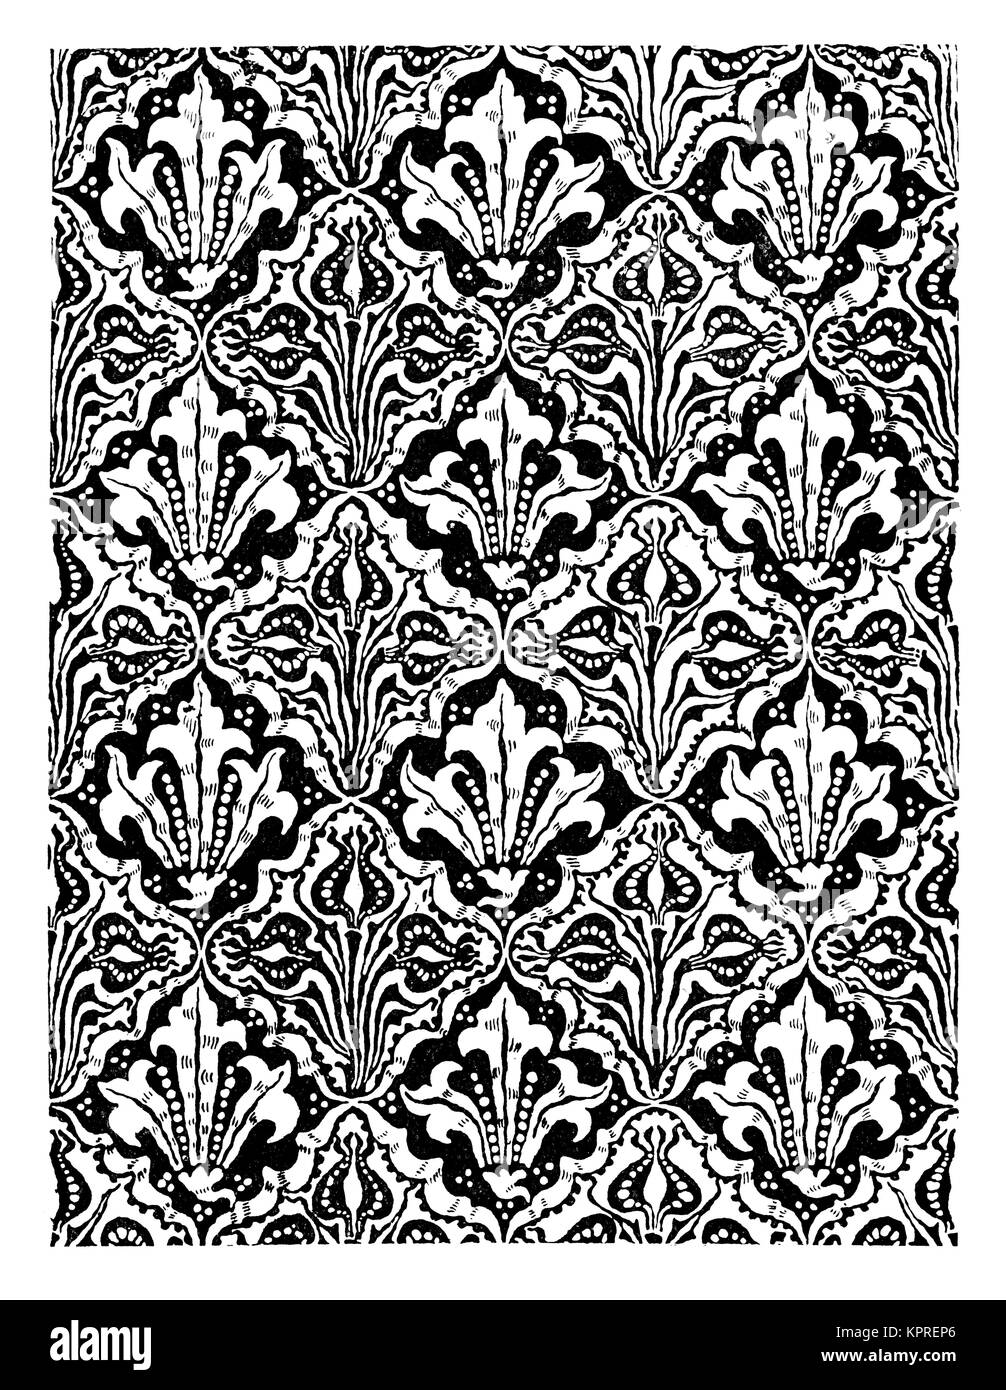 Seed and flower wallpaper design by artist and designer Walter Crane from 1894 Volume 4 of The Studio Magazine Stock Photo